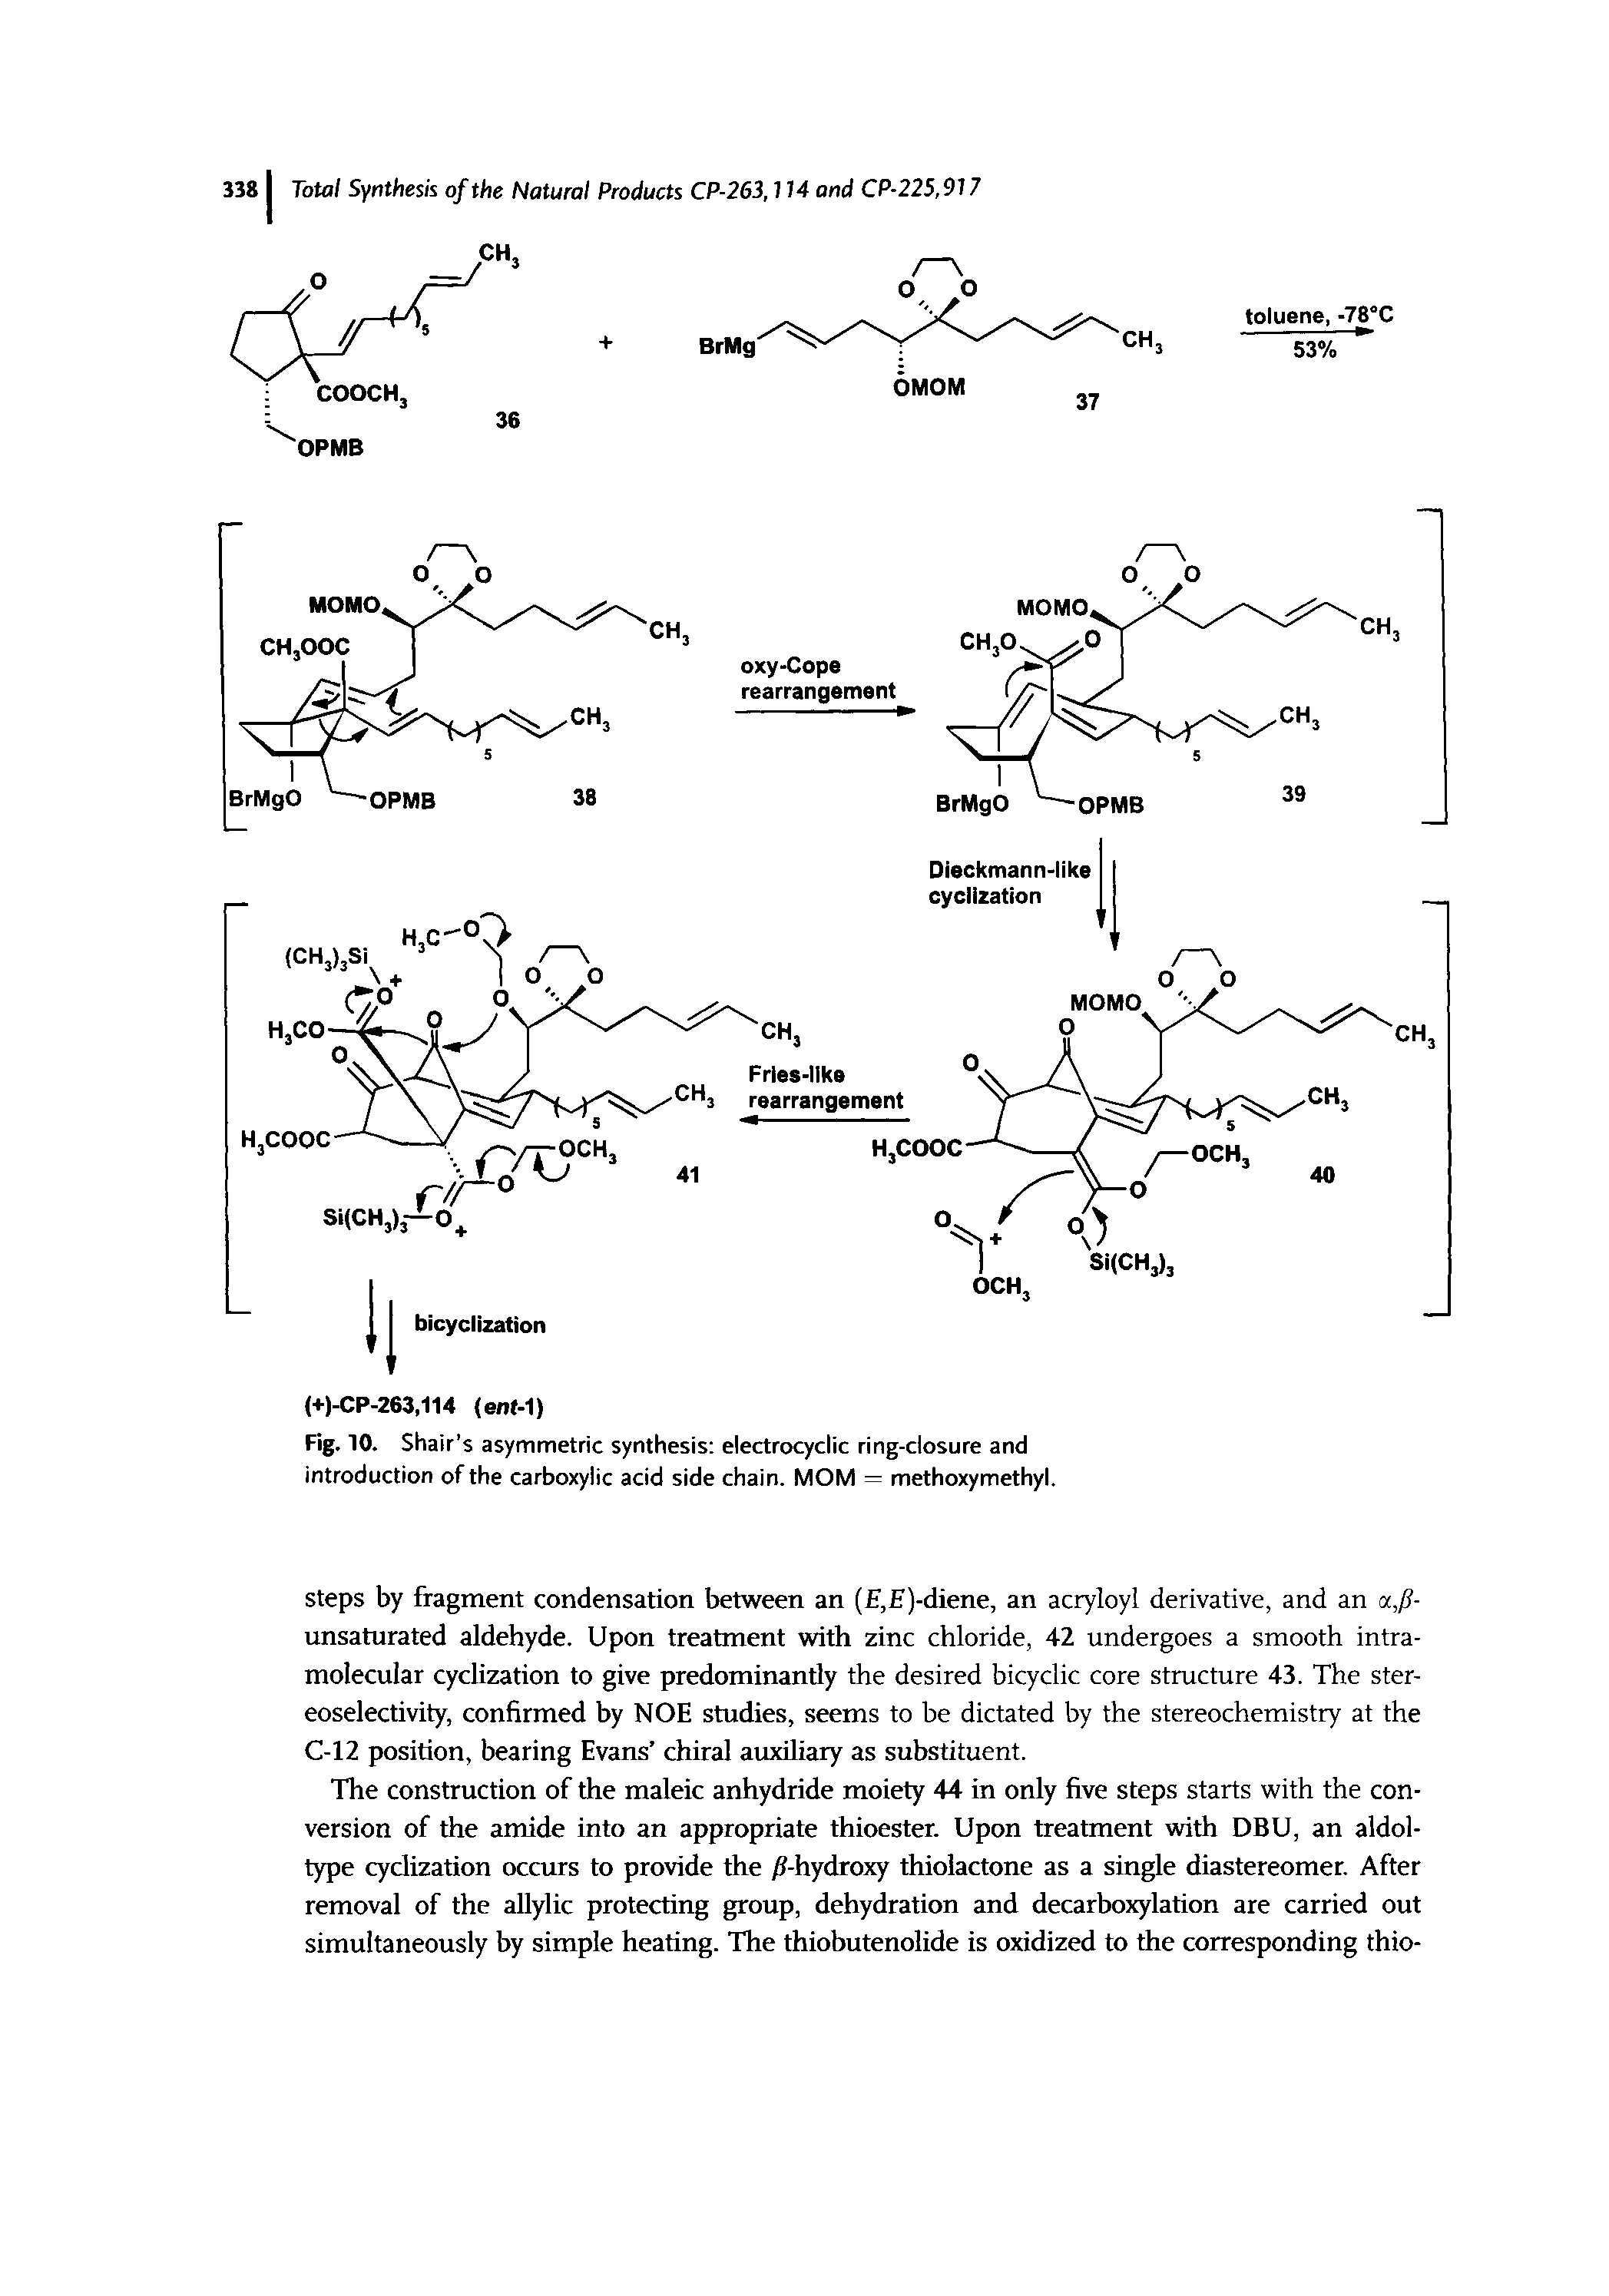 Fig. 10. Shair s asymmetric synthesis electrocydic ring-closure and introduction of the carboxylic acid side chain. MOM = methoxymethyl.